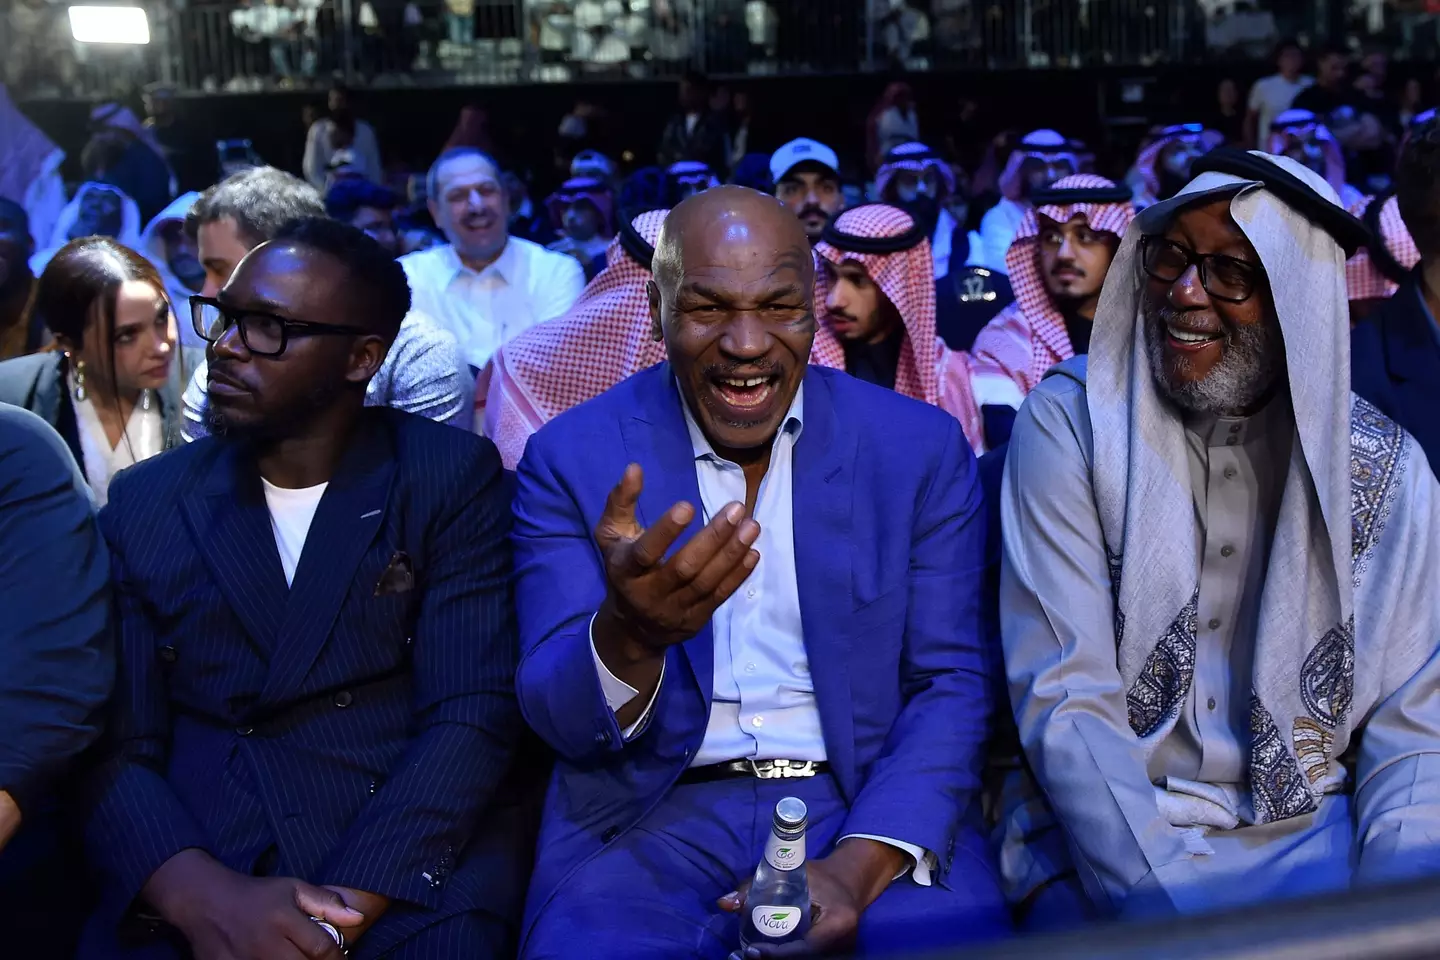 Tyson was in the Middle East to watch Tommy Fury. Image: Alamy